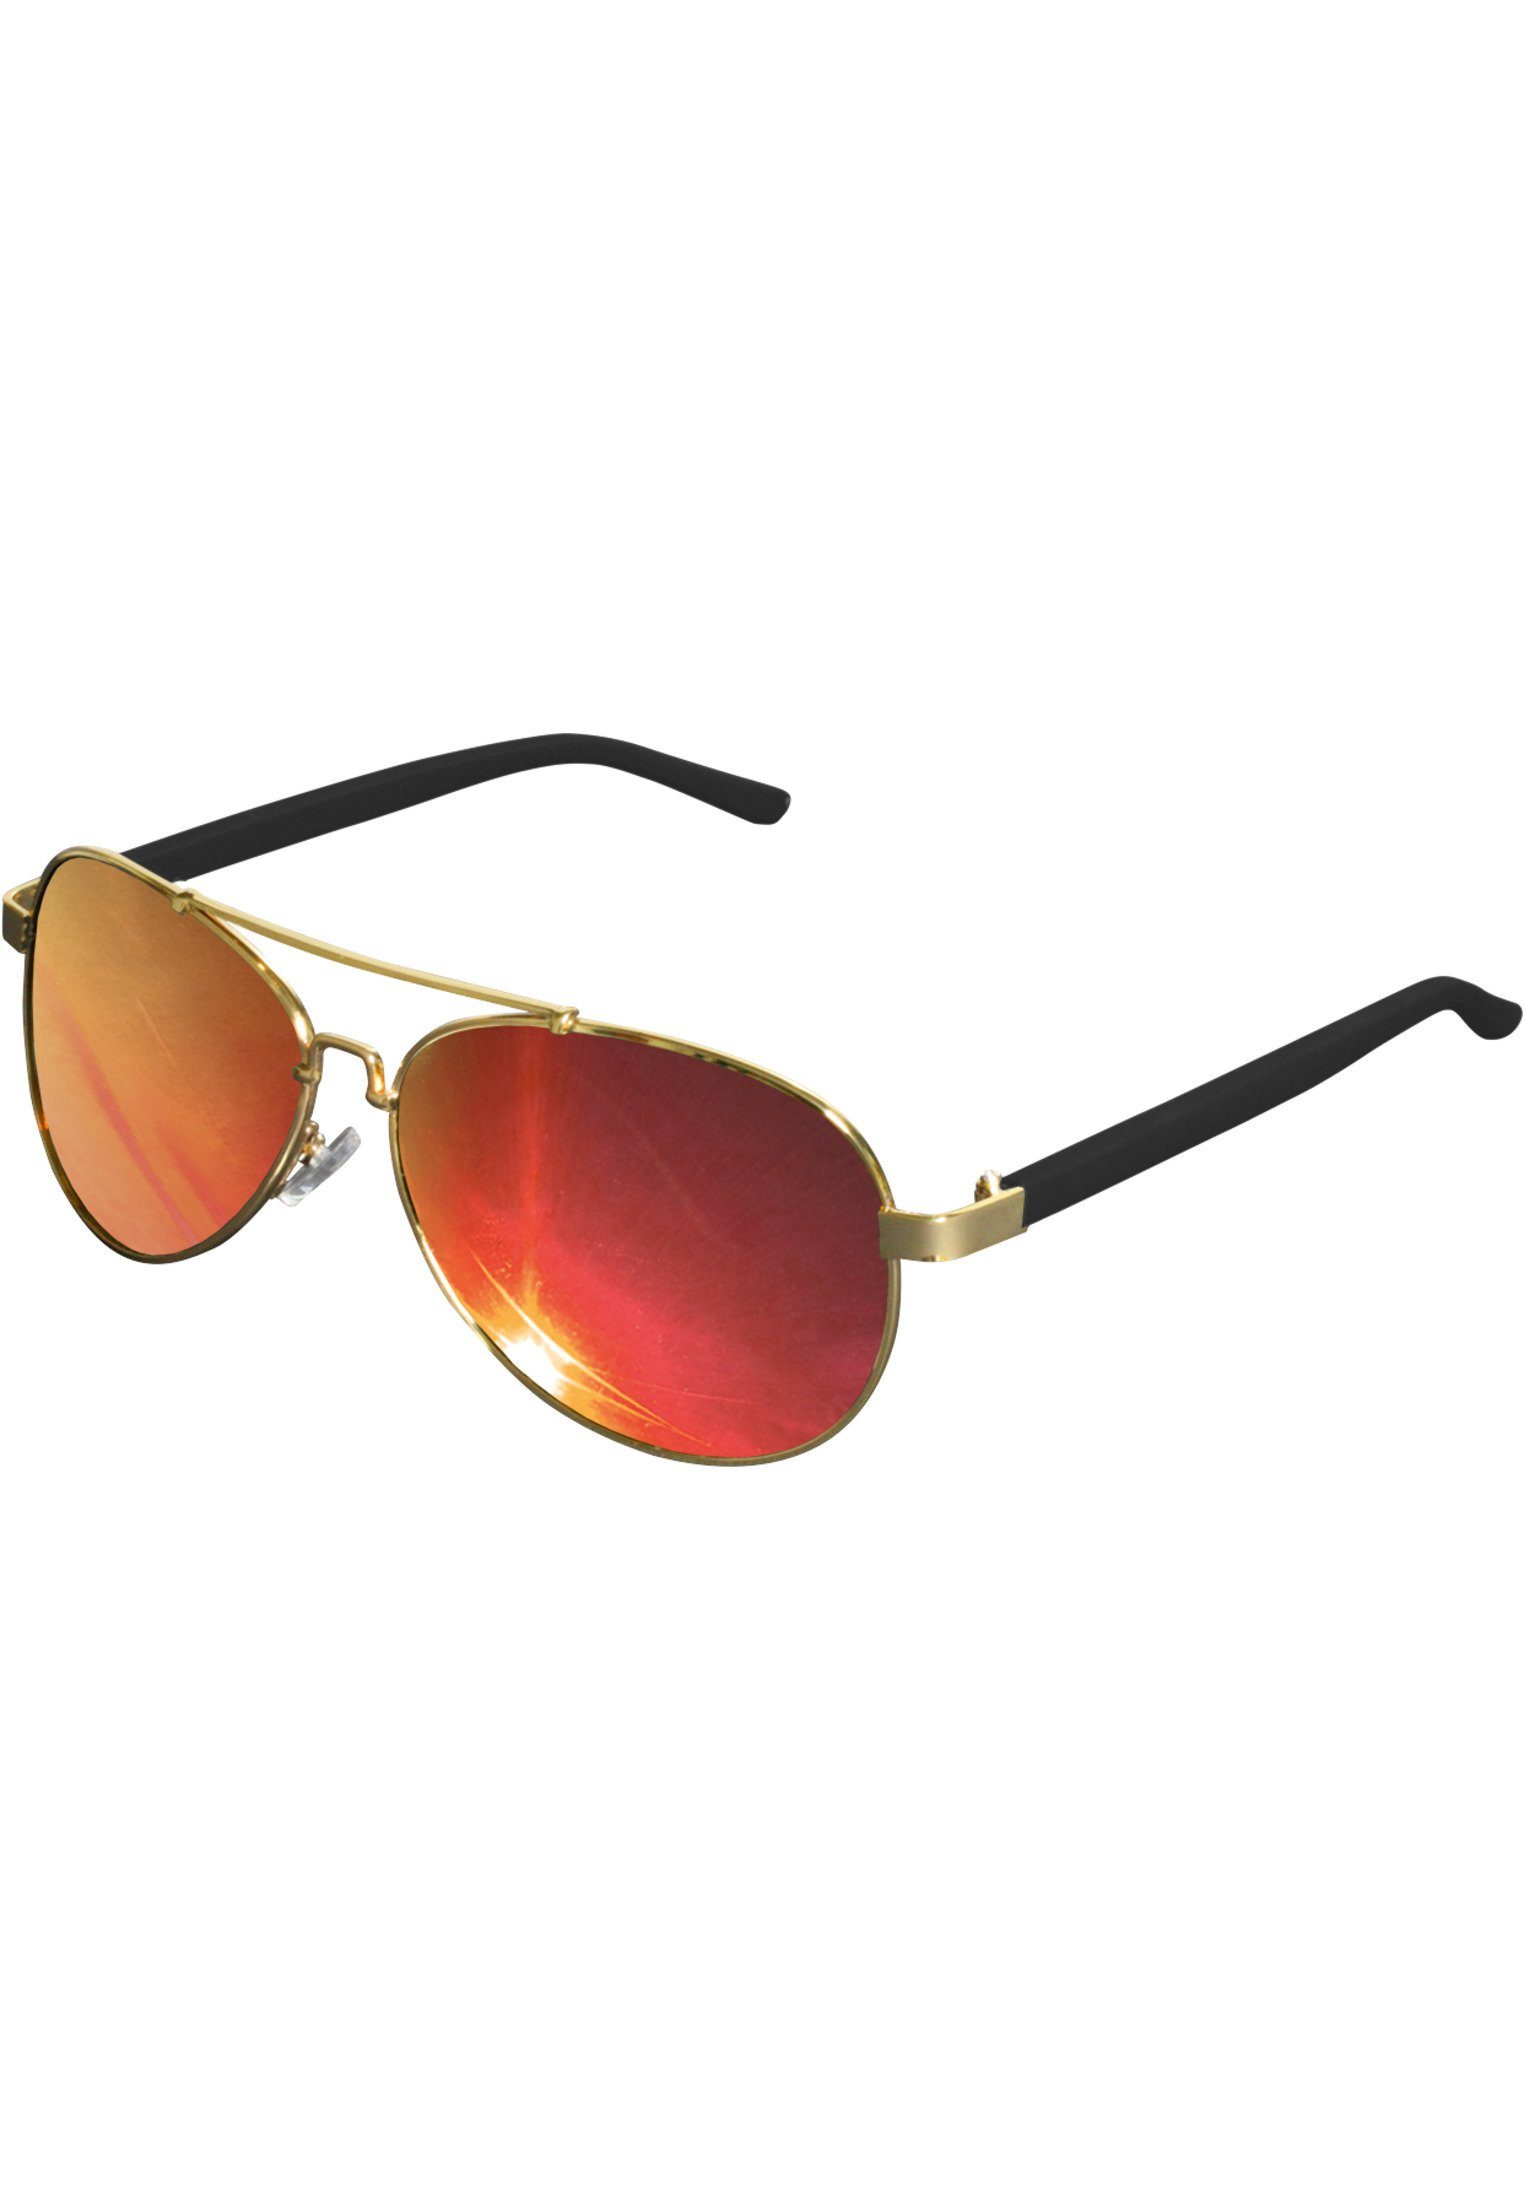 MSTRDS Sonnenbrille Accessoires Sunglasses Mumbo Mirror gold/red